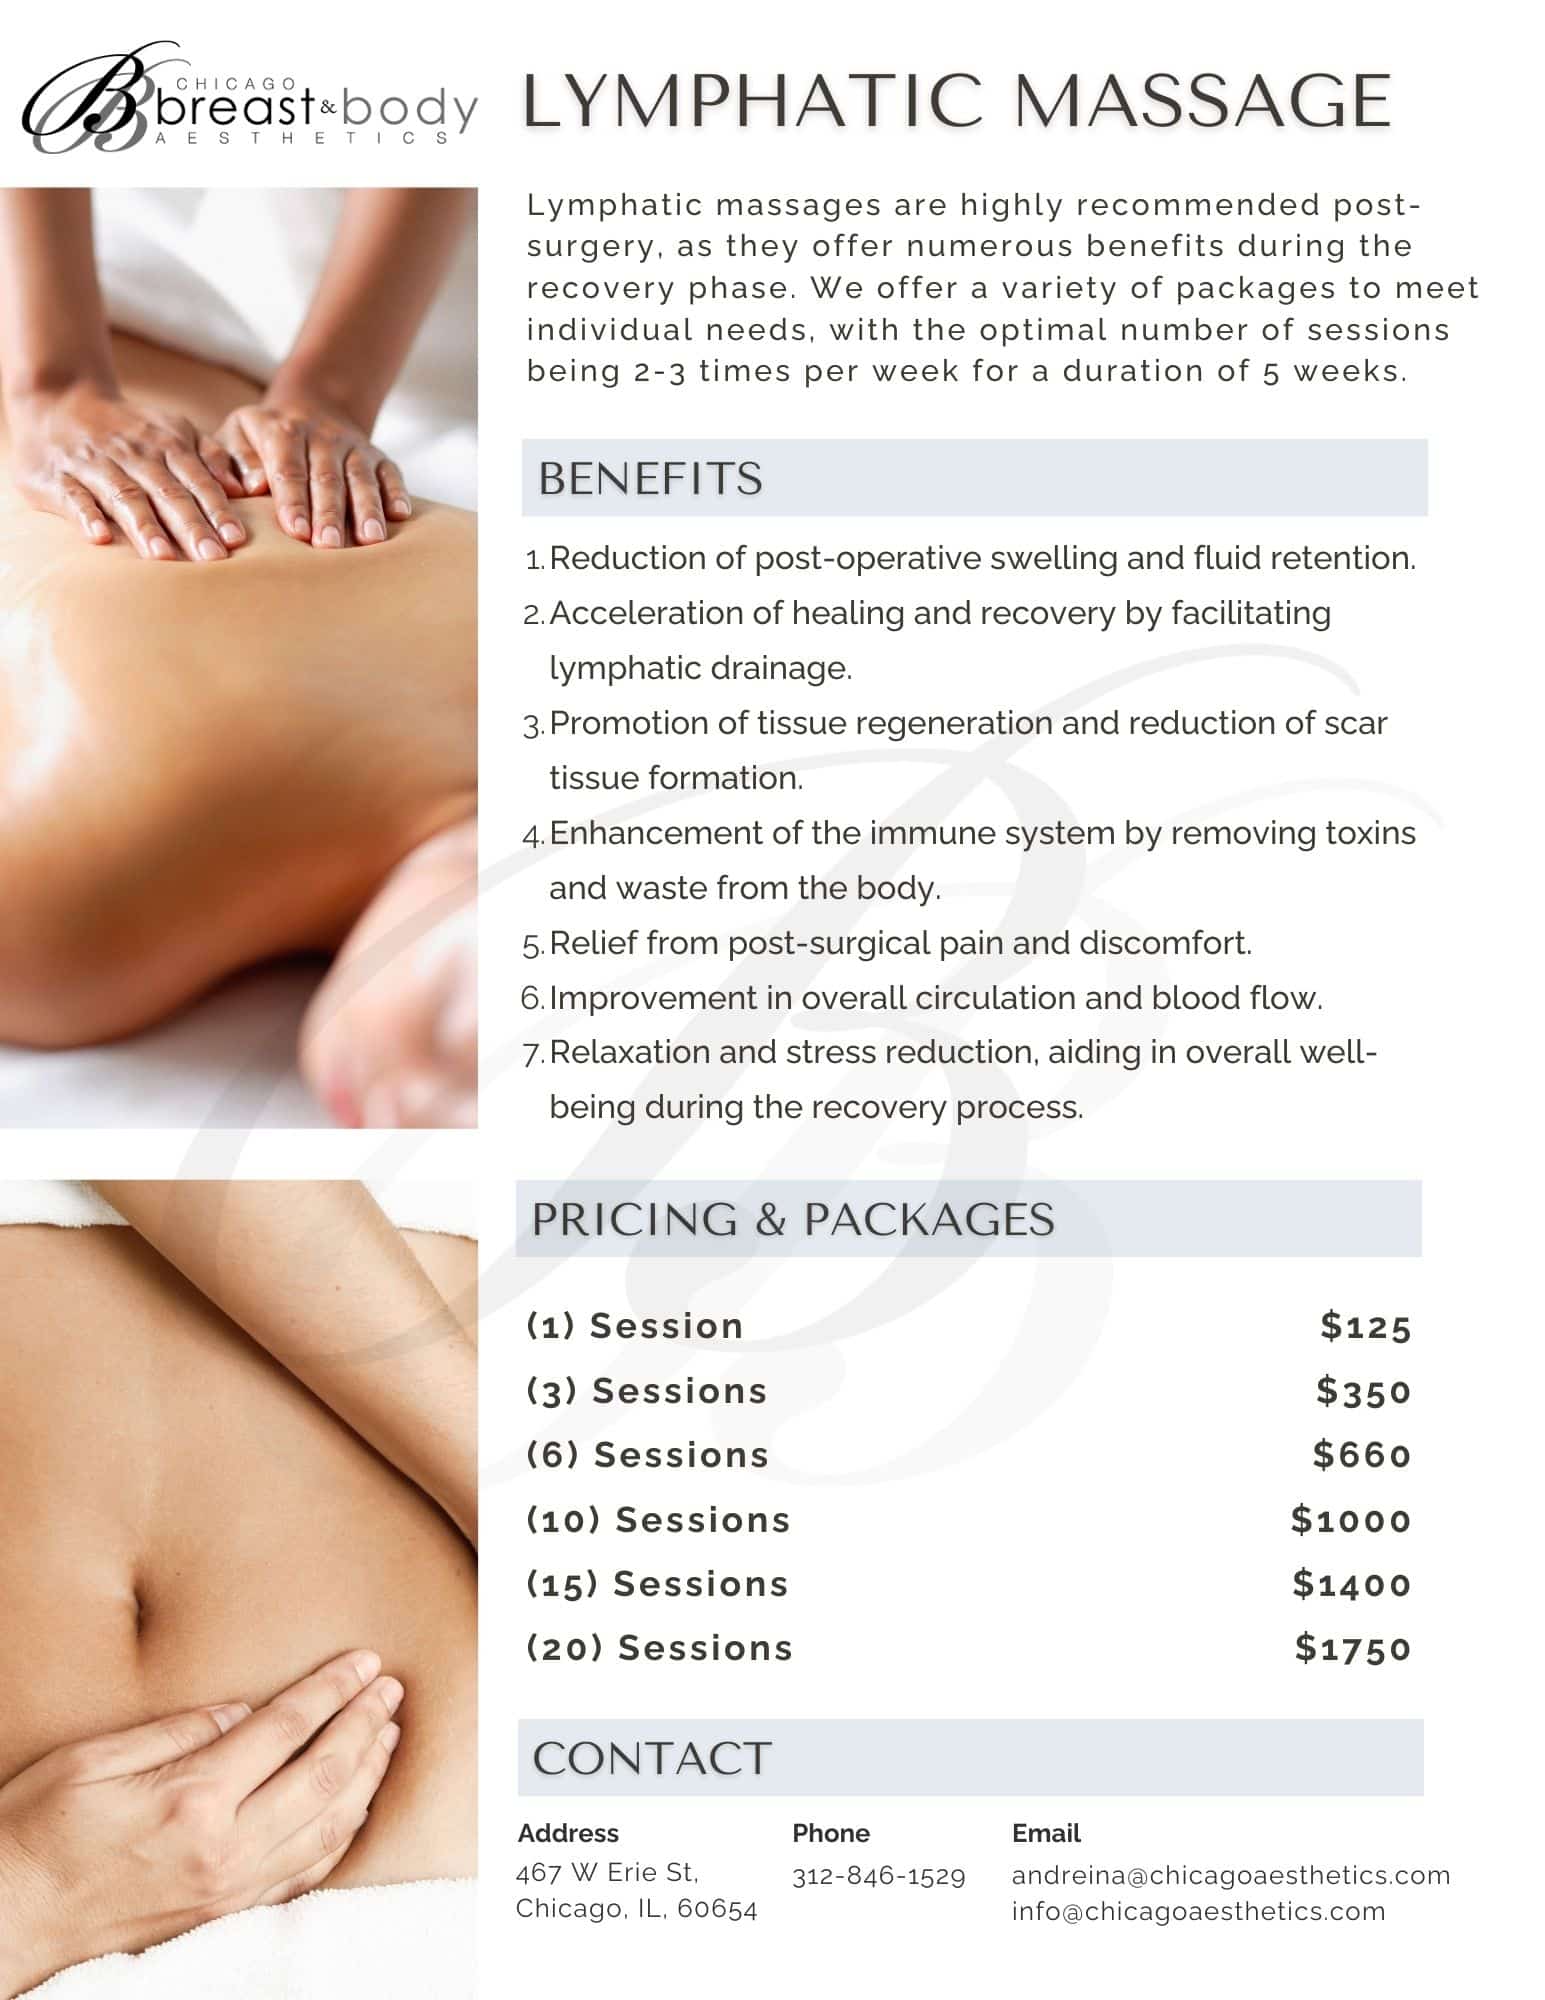 Lymphatic drainage massage pricing and benefits